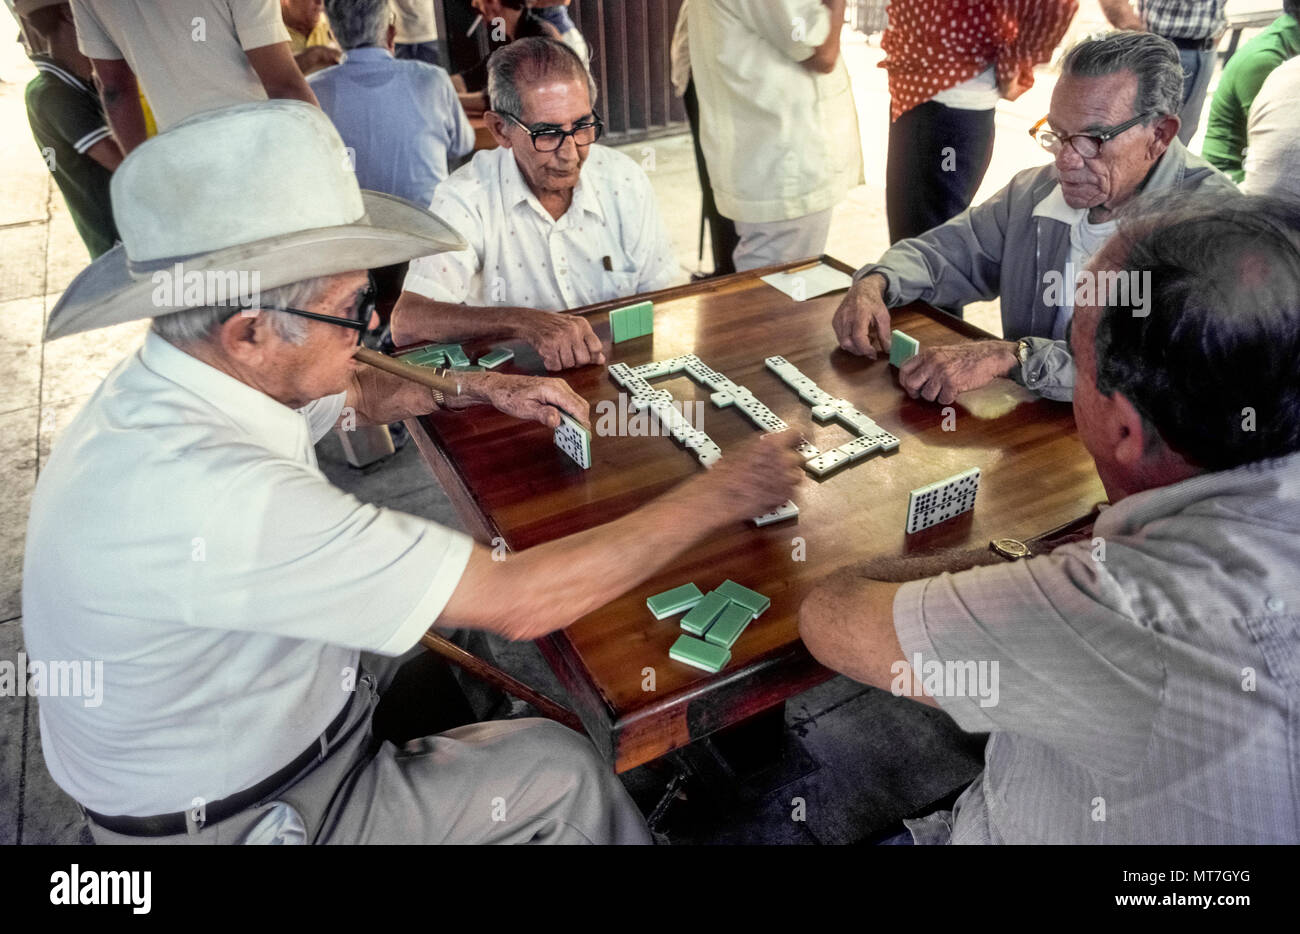 an-elderly-man-smoking-a-cuban-cigar-slaps-down-his-plastic-tile-on-a-wooden-table-during-a-noisy-game-of-dominoes-played-in-domino-park-in-little-havana-the-colorful-neighborhood-of-hispanic-culture-in-miami-florida-usa-located-at-the-corner-of-sw-8th-street-calle-ocho-and-15th-avenue-this-outdoor-social-center-is-officially-named-maximo-gomez-park-and-has-become-a-landmark-that-daily-draws-dozens-of-older-players-as-well-as-hundreds-of-tourists-historical-photo-MT7GYG.jpg